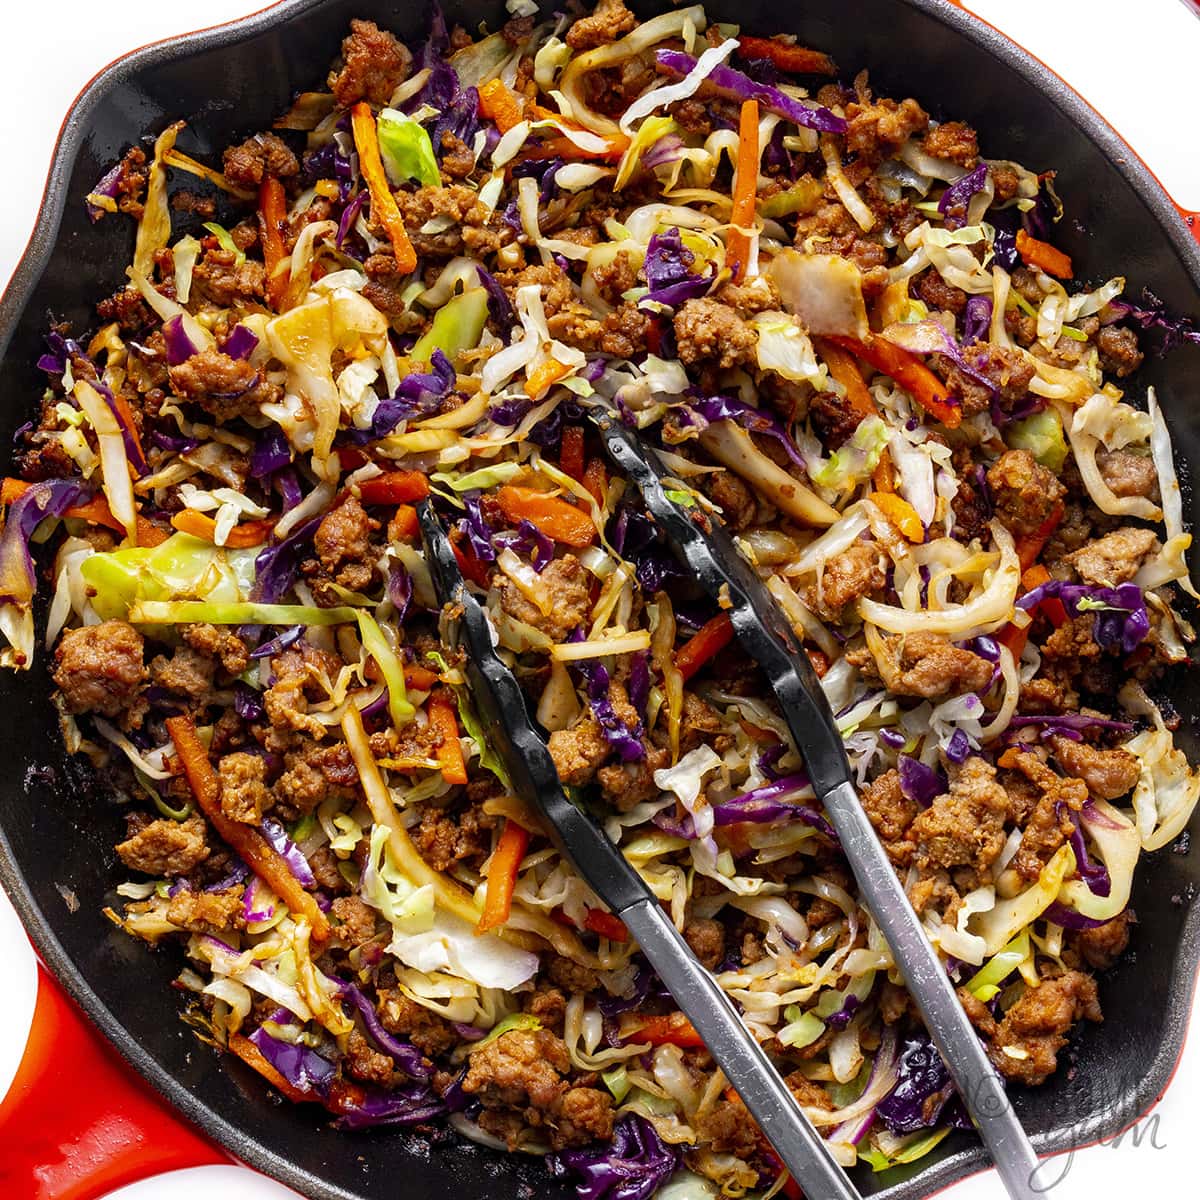 Coleslaw mix and coconut aminos added to the skillet and sauteed.